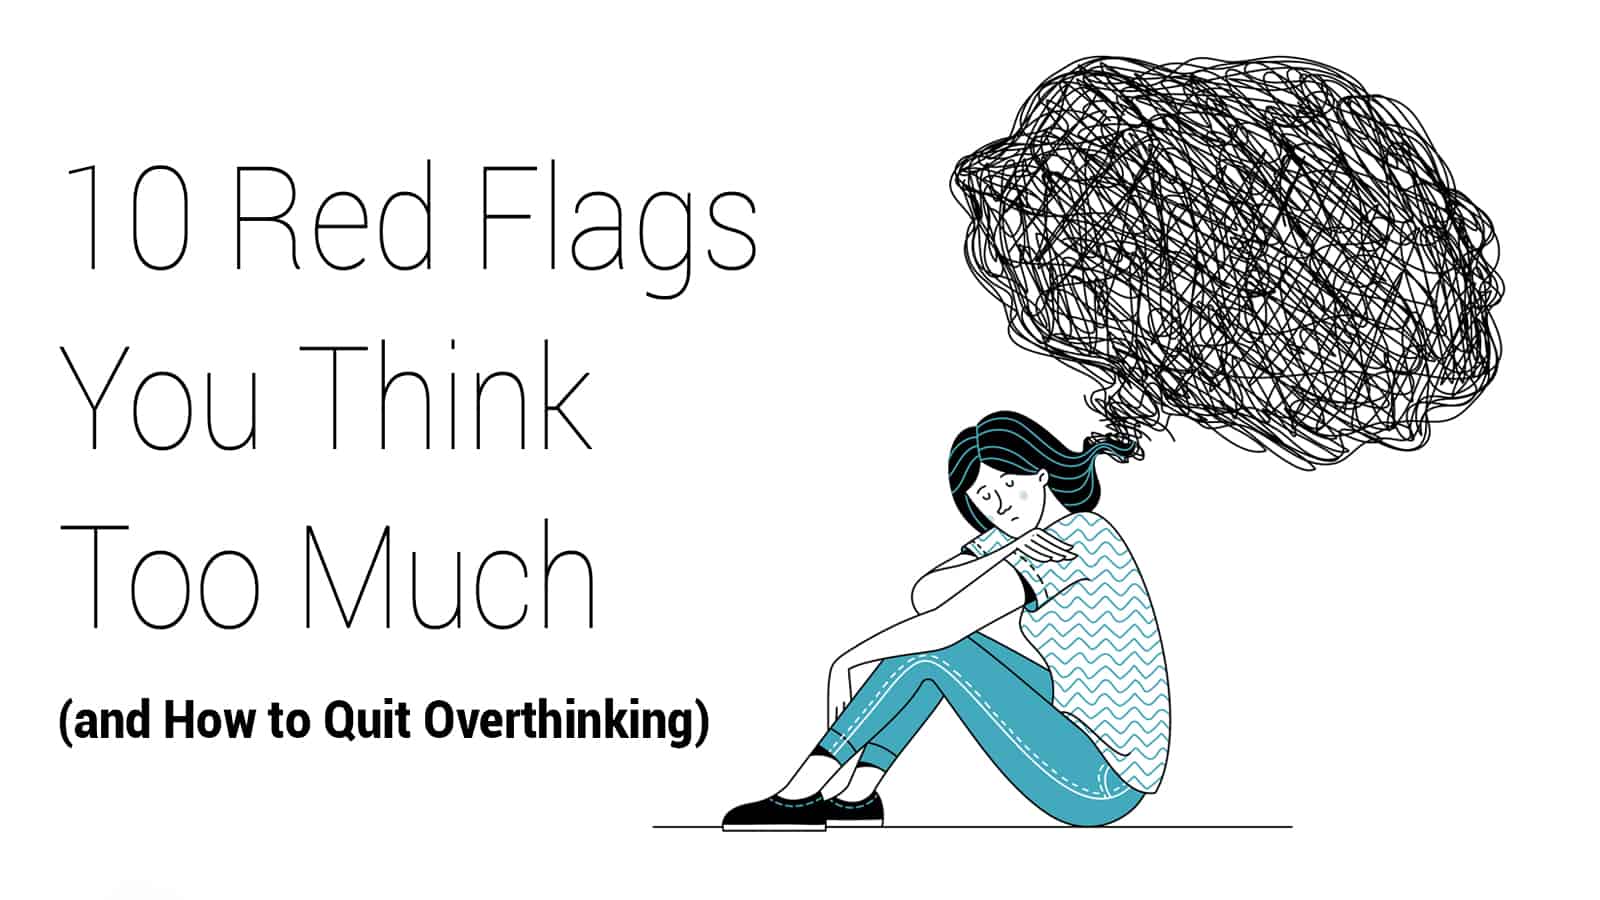 10 Red Flags You Think Too Much (and How to